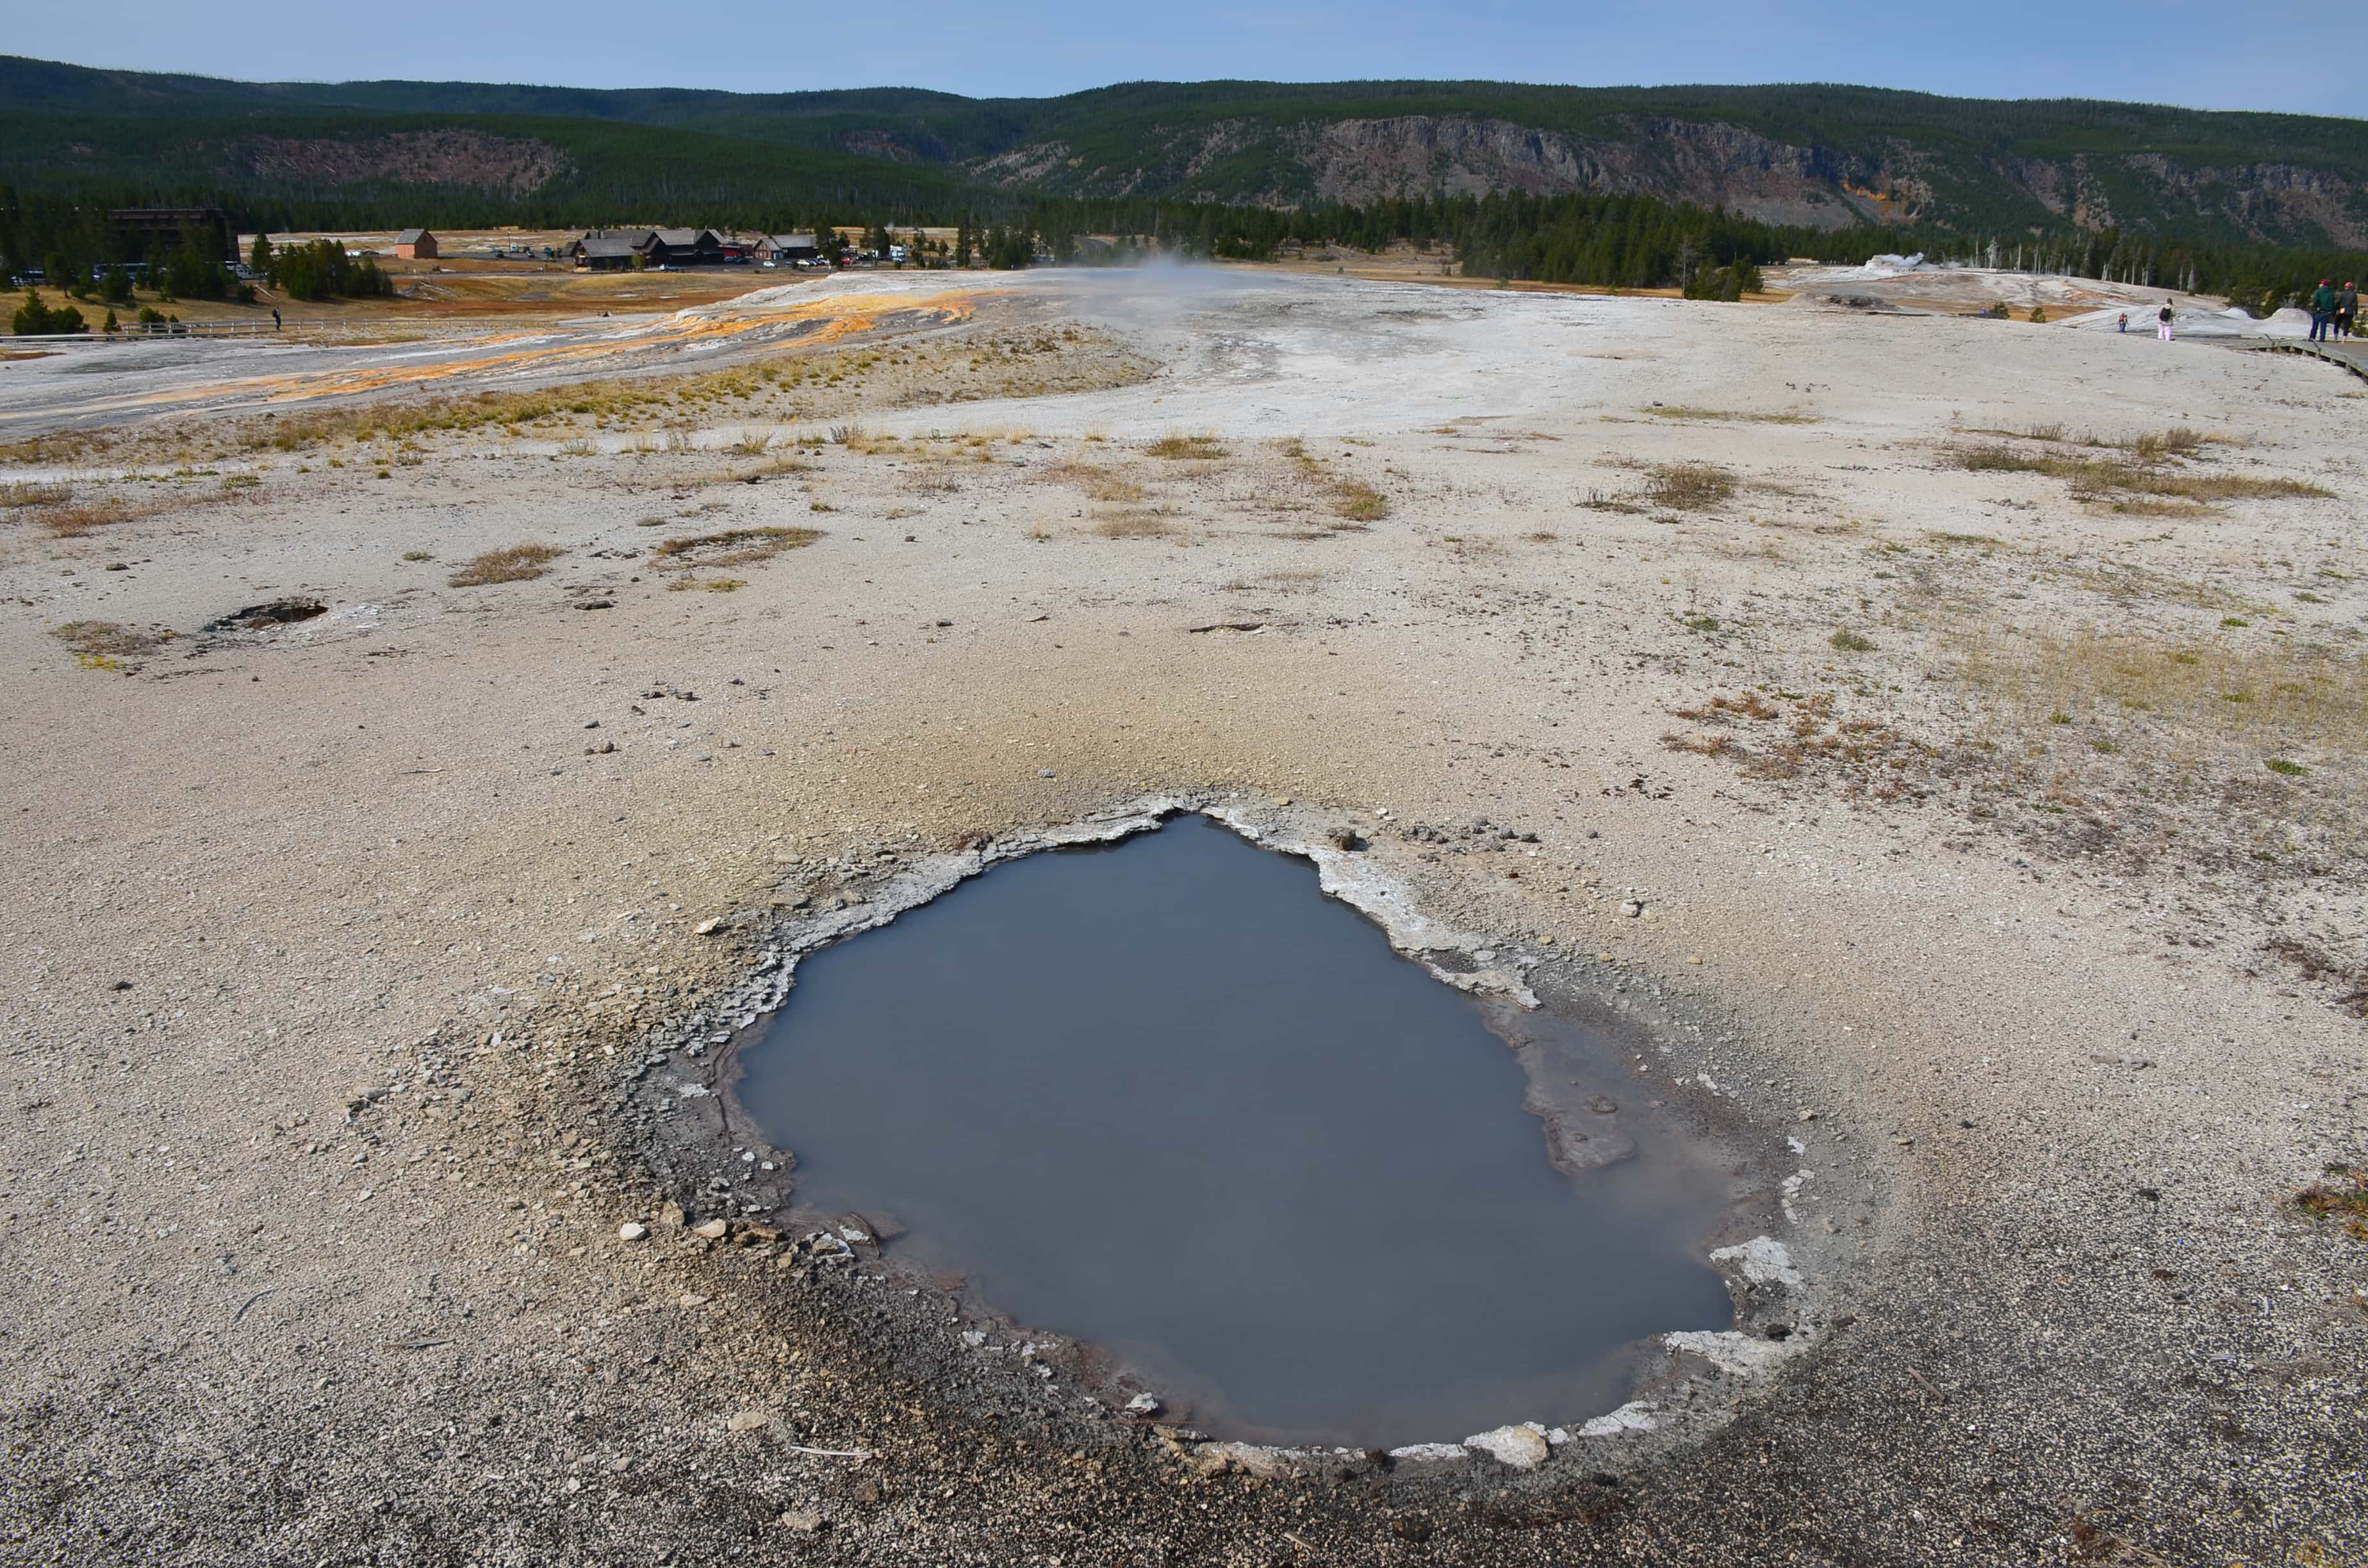 Infant Geyser on Geyser Hill at the Upper Geyser Basin in Yellowstone National Park, Wyoming